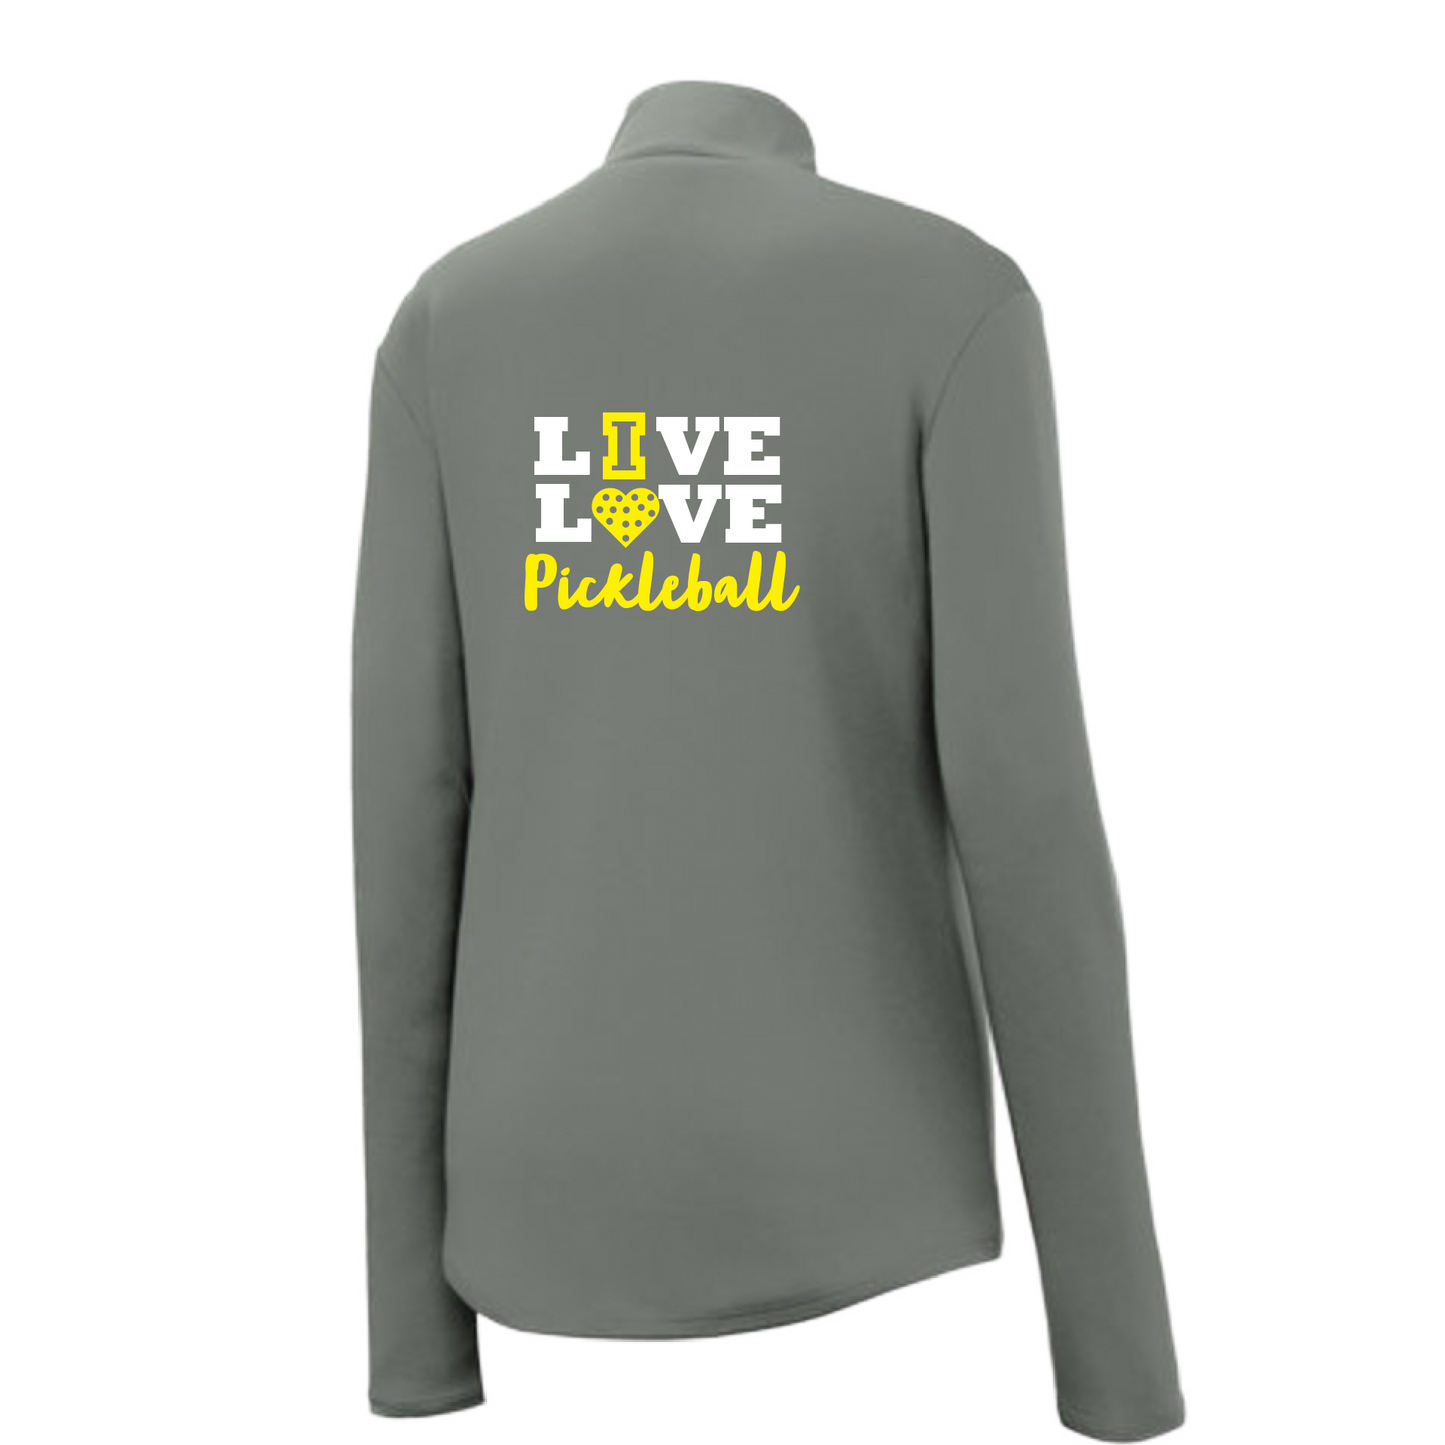 Pickleball Design: Live Love Pickleball  Women's 1/4-Zip Pullover:  Princess seams and drop tail hem.  Turn up the volume in this Women's shirt with its perfect mix of softness and attitude. Material is ultra-comfortable with moisture wicking properties and tri-blend softness. PosiCharge technology locks in color. Highly breathable and lightweight. Versatile enough for wearing year-round.